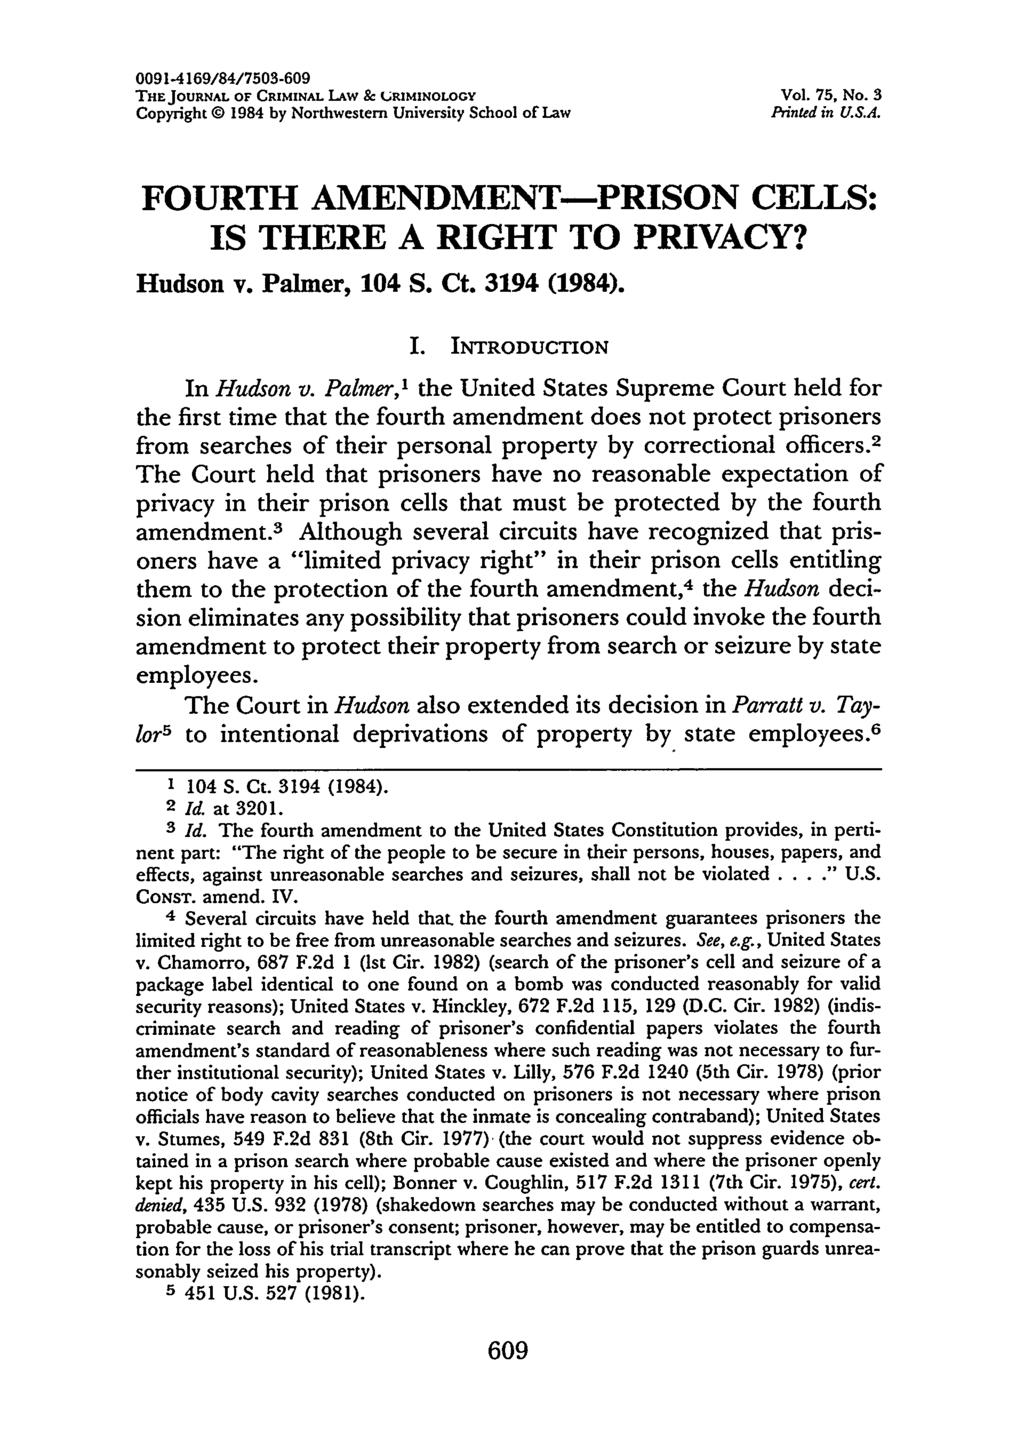 0091-4169/84/7503-609 THE JOURNAL OF CRIMINAL LAW & URIMINOLOGY Vol. 75, No. 3 Copyright 0 1984 by Northwestern University School of Law Printed in U.S.A. FOURTH AMENDMENT-PRISON CELLS: IS THERE A RIGHT TO PRIVACY?